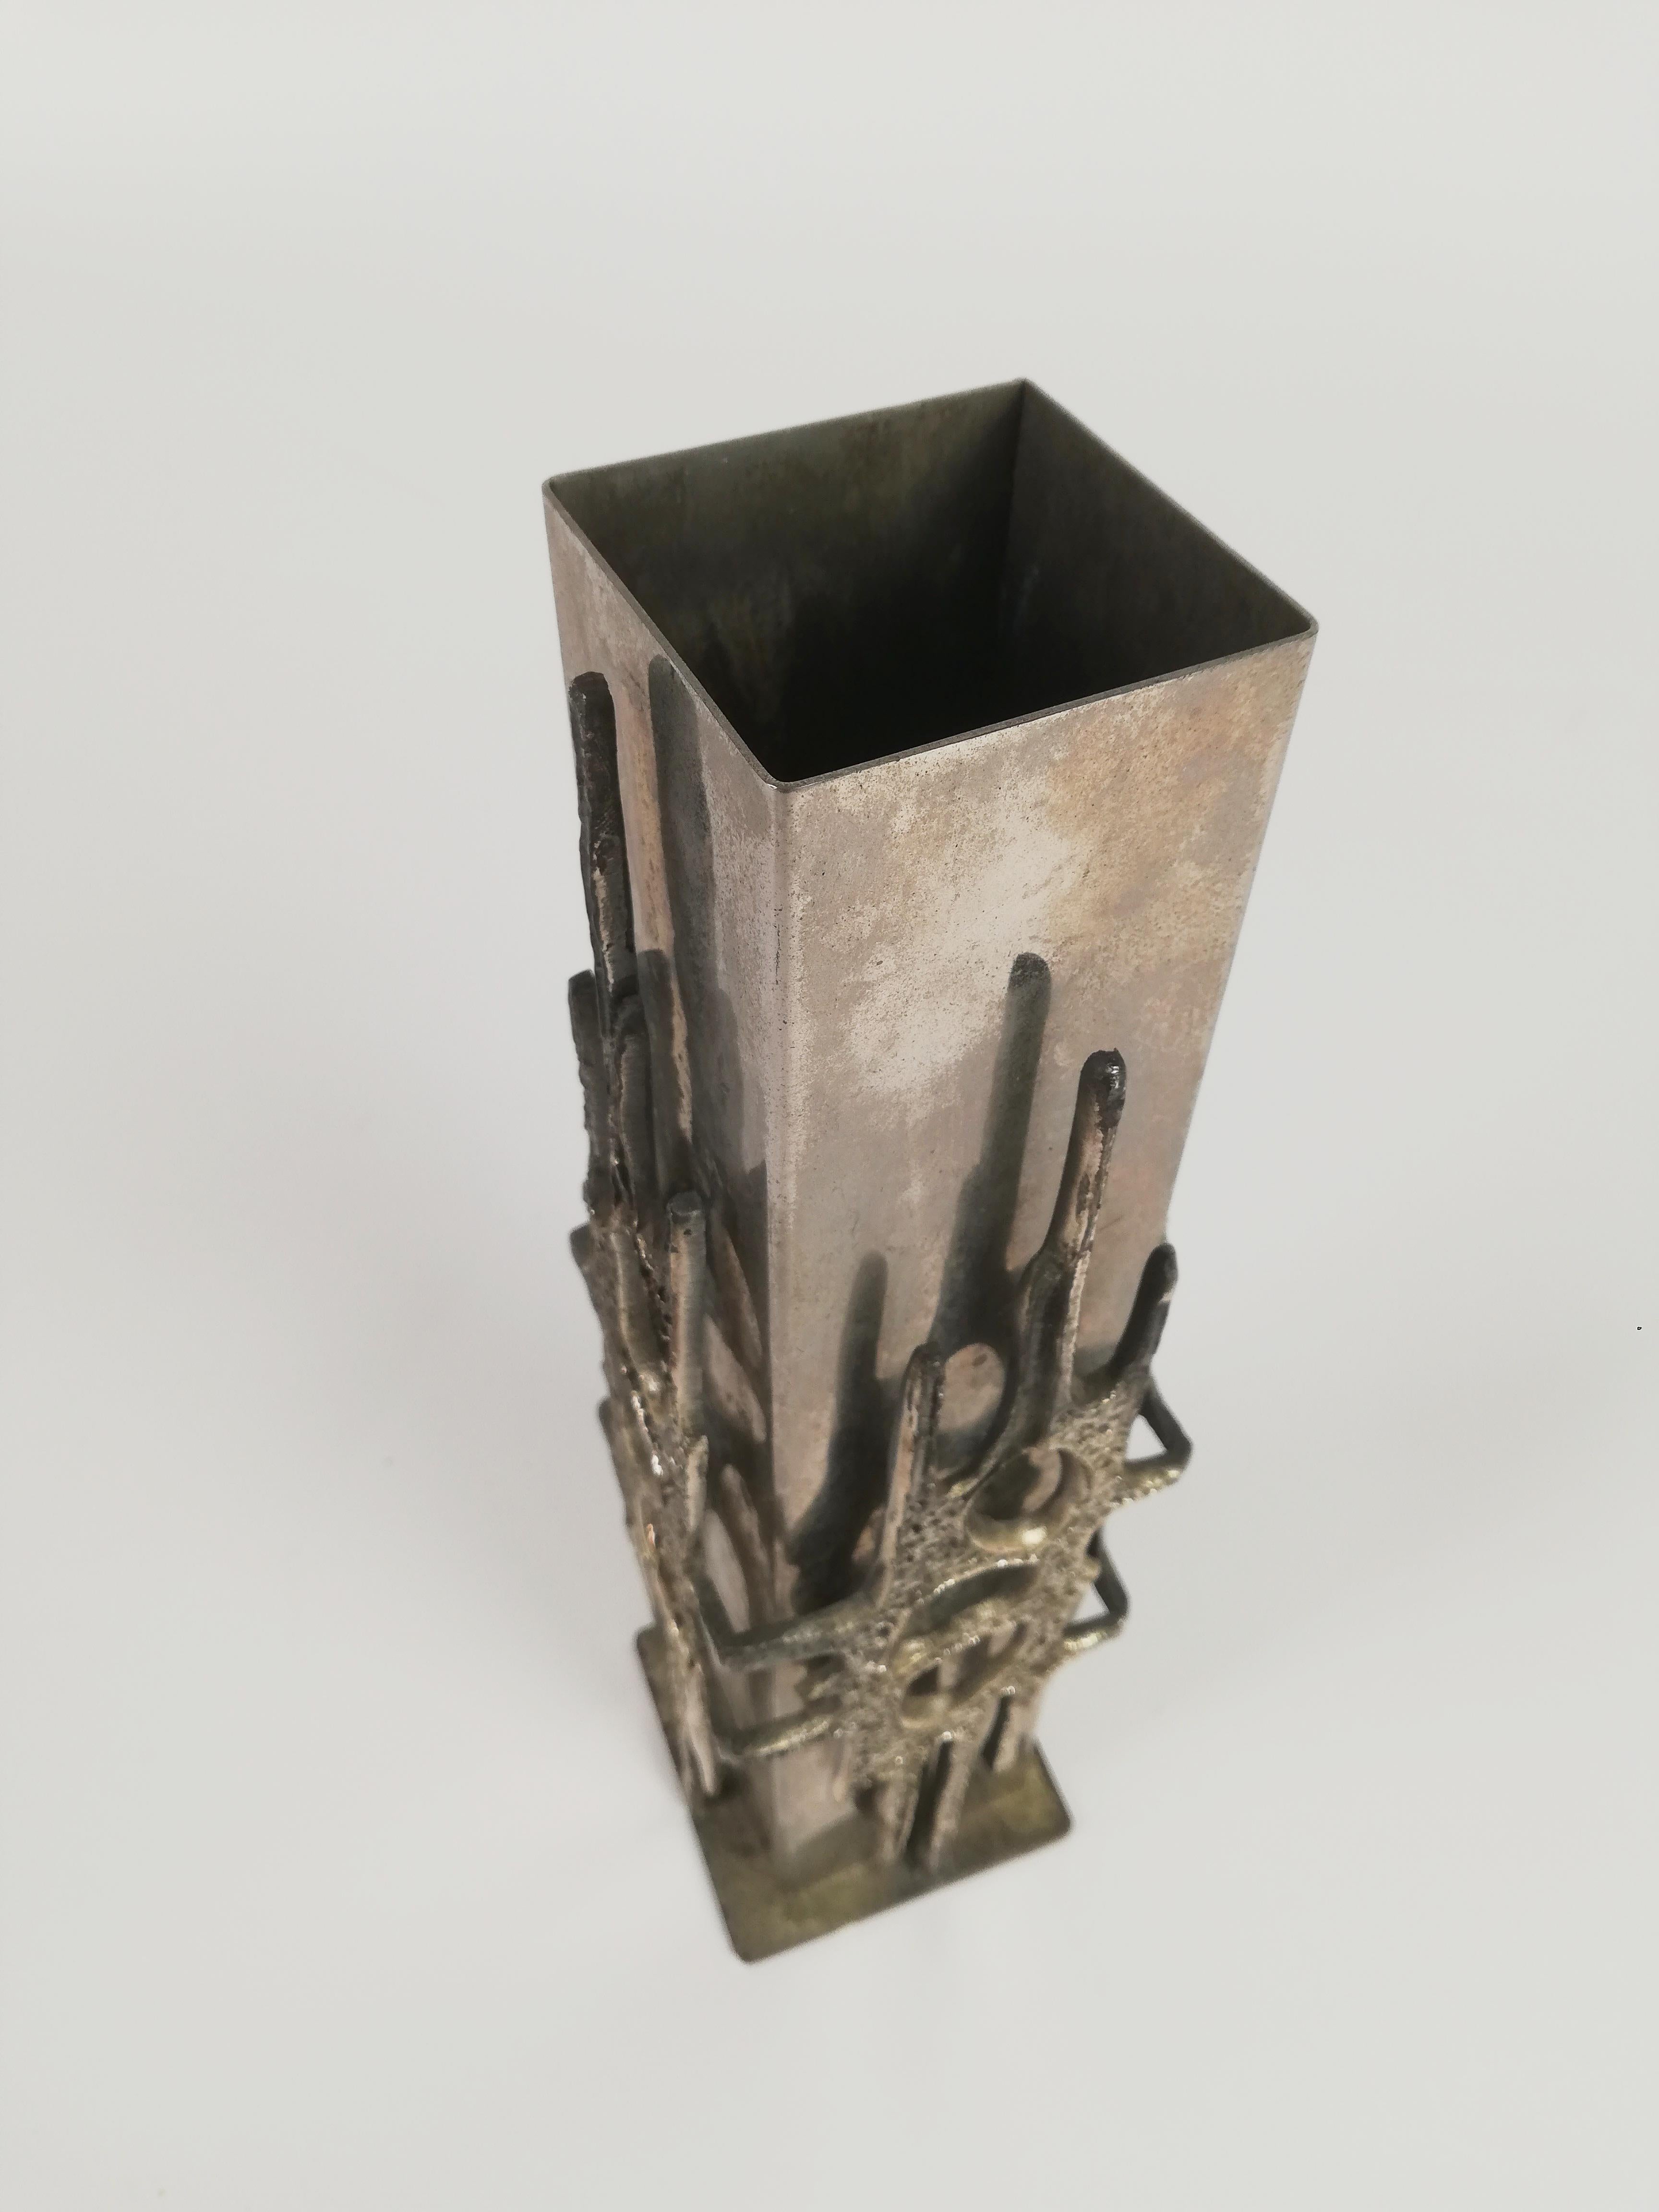 Brutalist Italian Steel Vase in the Style of Luciano Frigerio, Italy 1970s For Sale 8